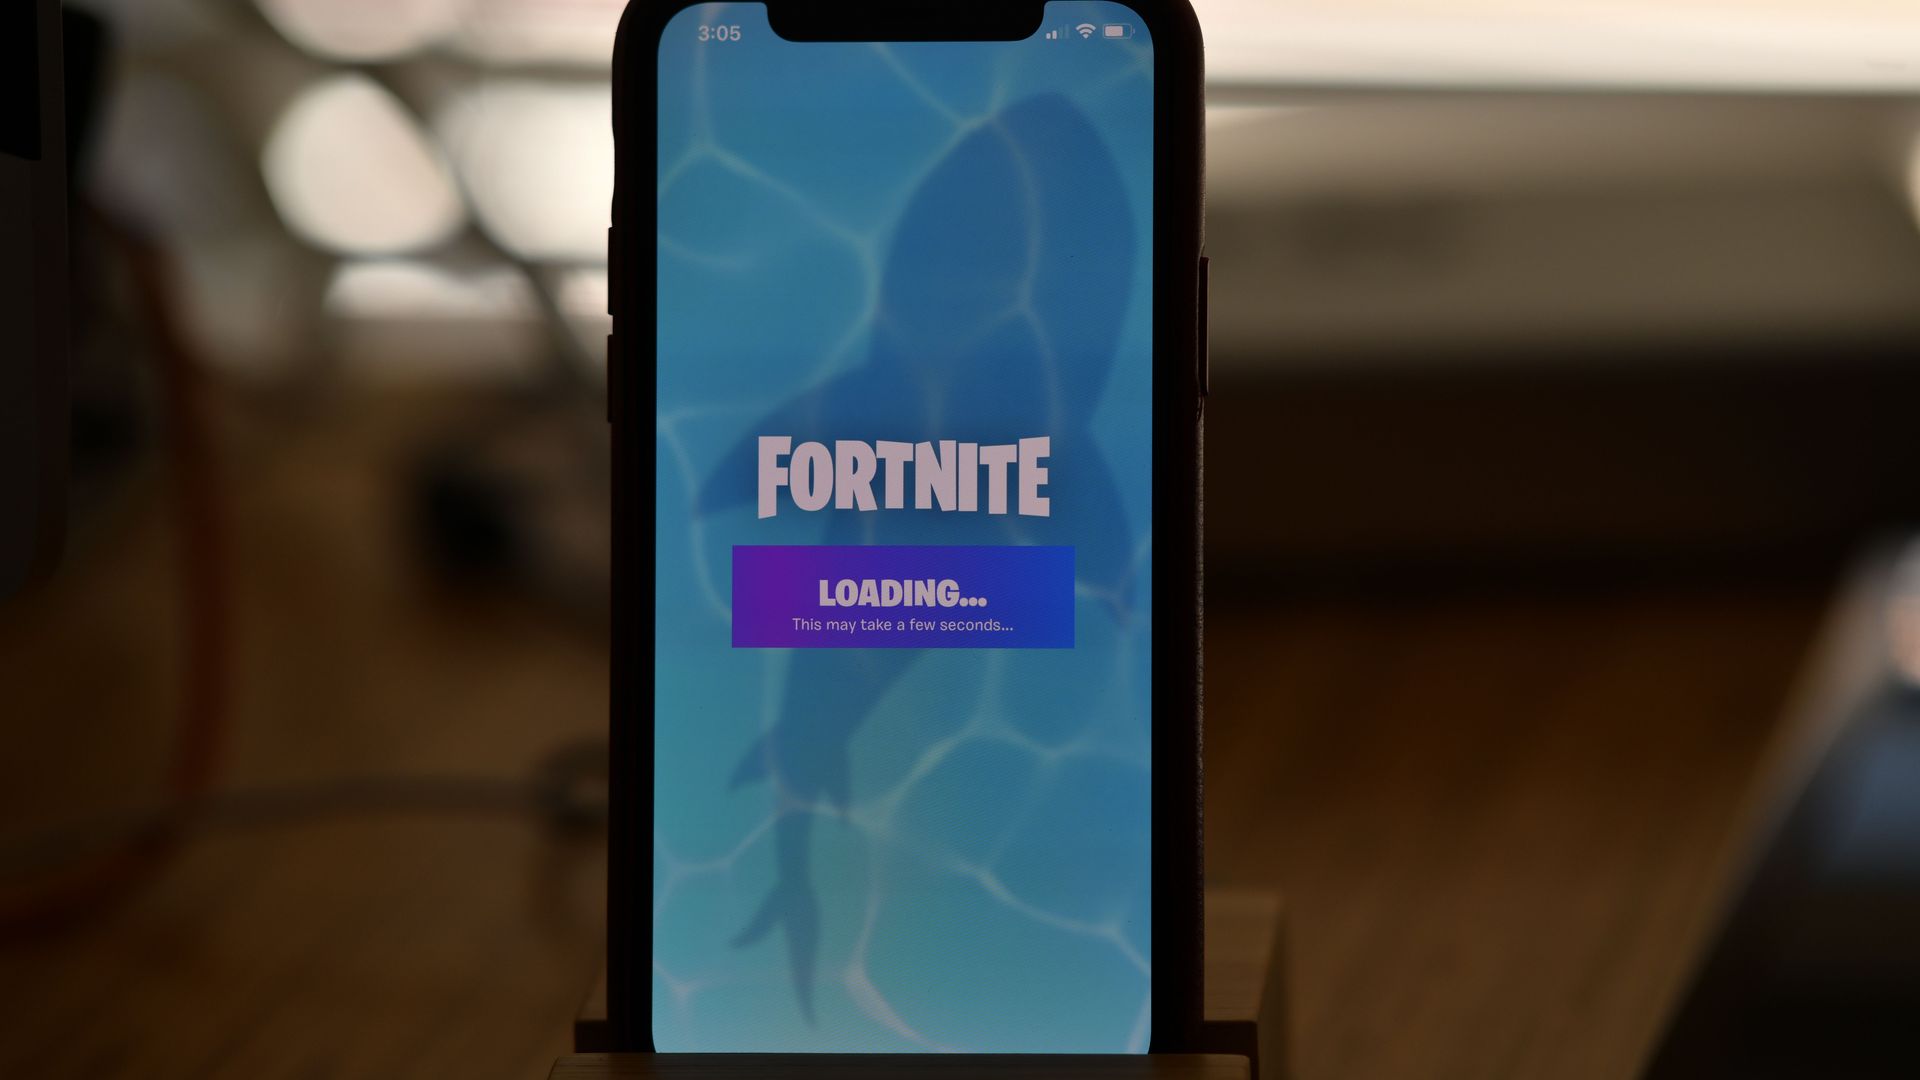 A photo of an iPhone displaying a loading screen for Epic Games' Fortnite app.